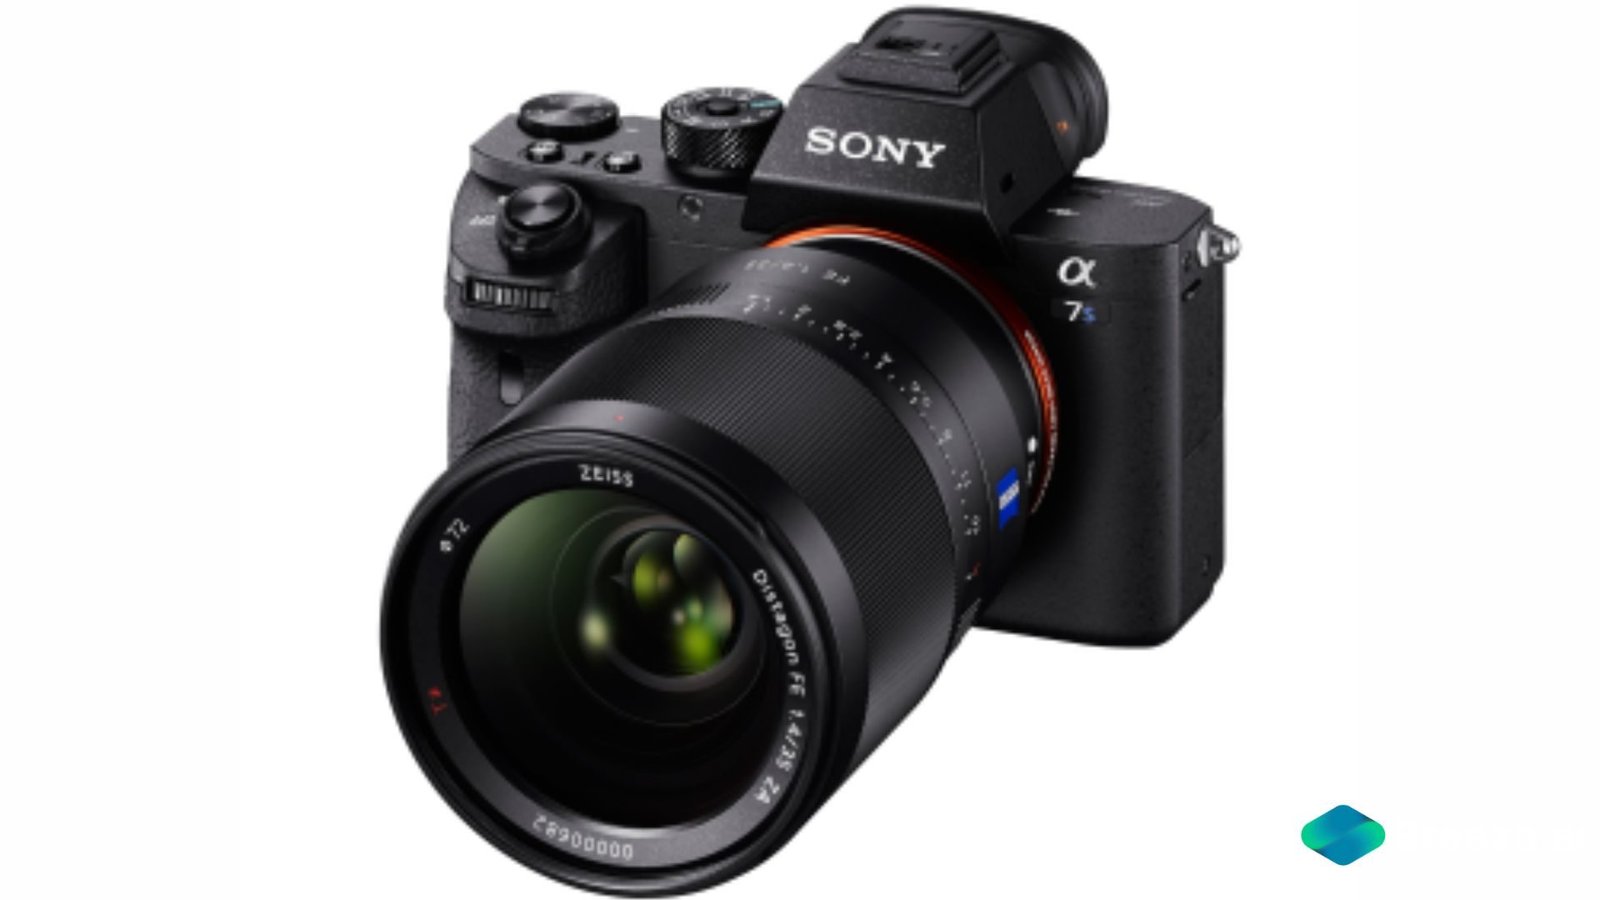 Rent Sony - A7S -II (Body) with Metabone Adapter in Delhi NCR, Rent Camera, Camera accessories, Camera lenses for rent, in Delhi Gurgaon Noida, hire Shooting equipment, Lighting equipment rental, Film gear rental for Video production, camera rental company in Delhi, film equipment rental company